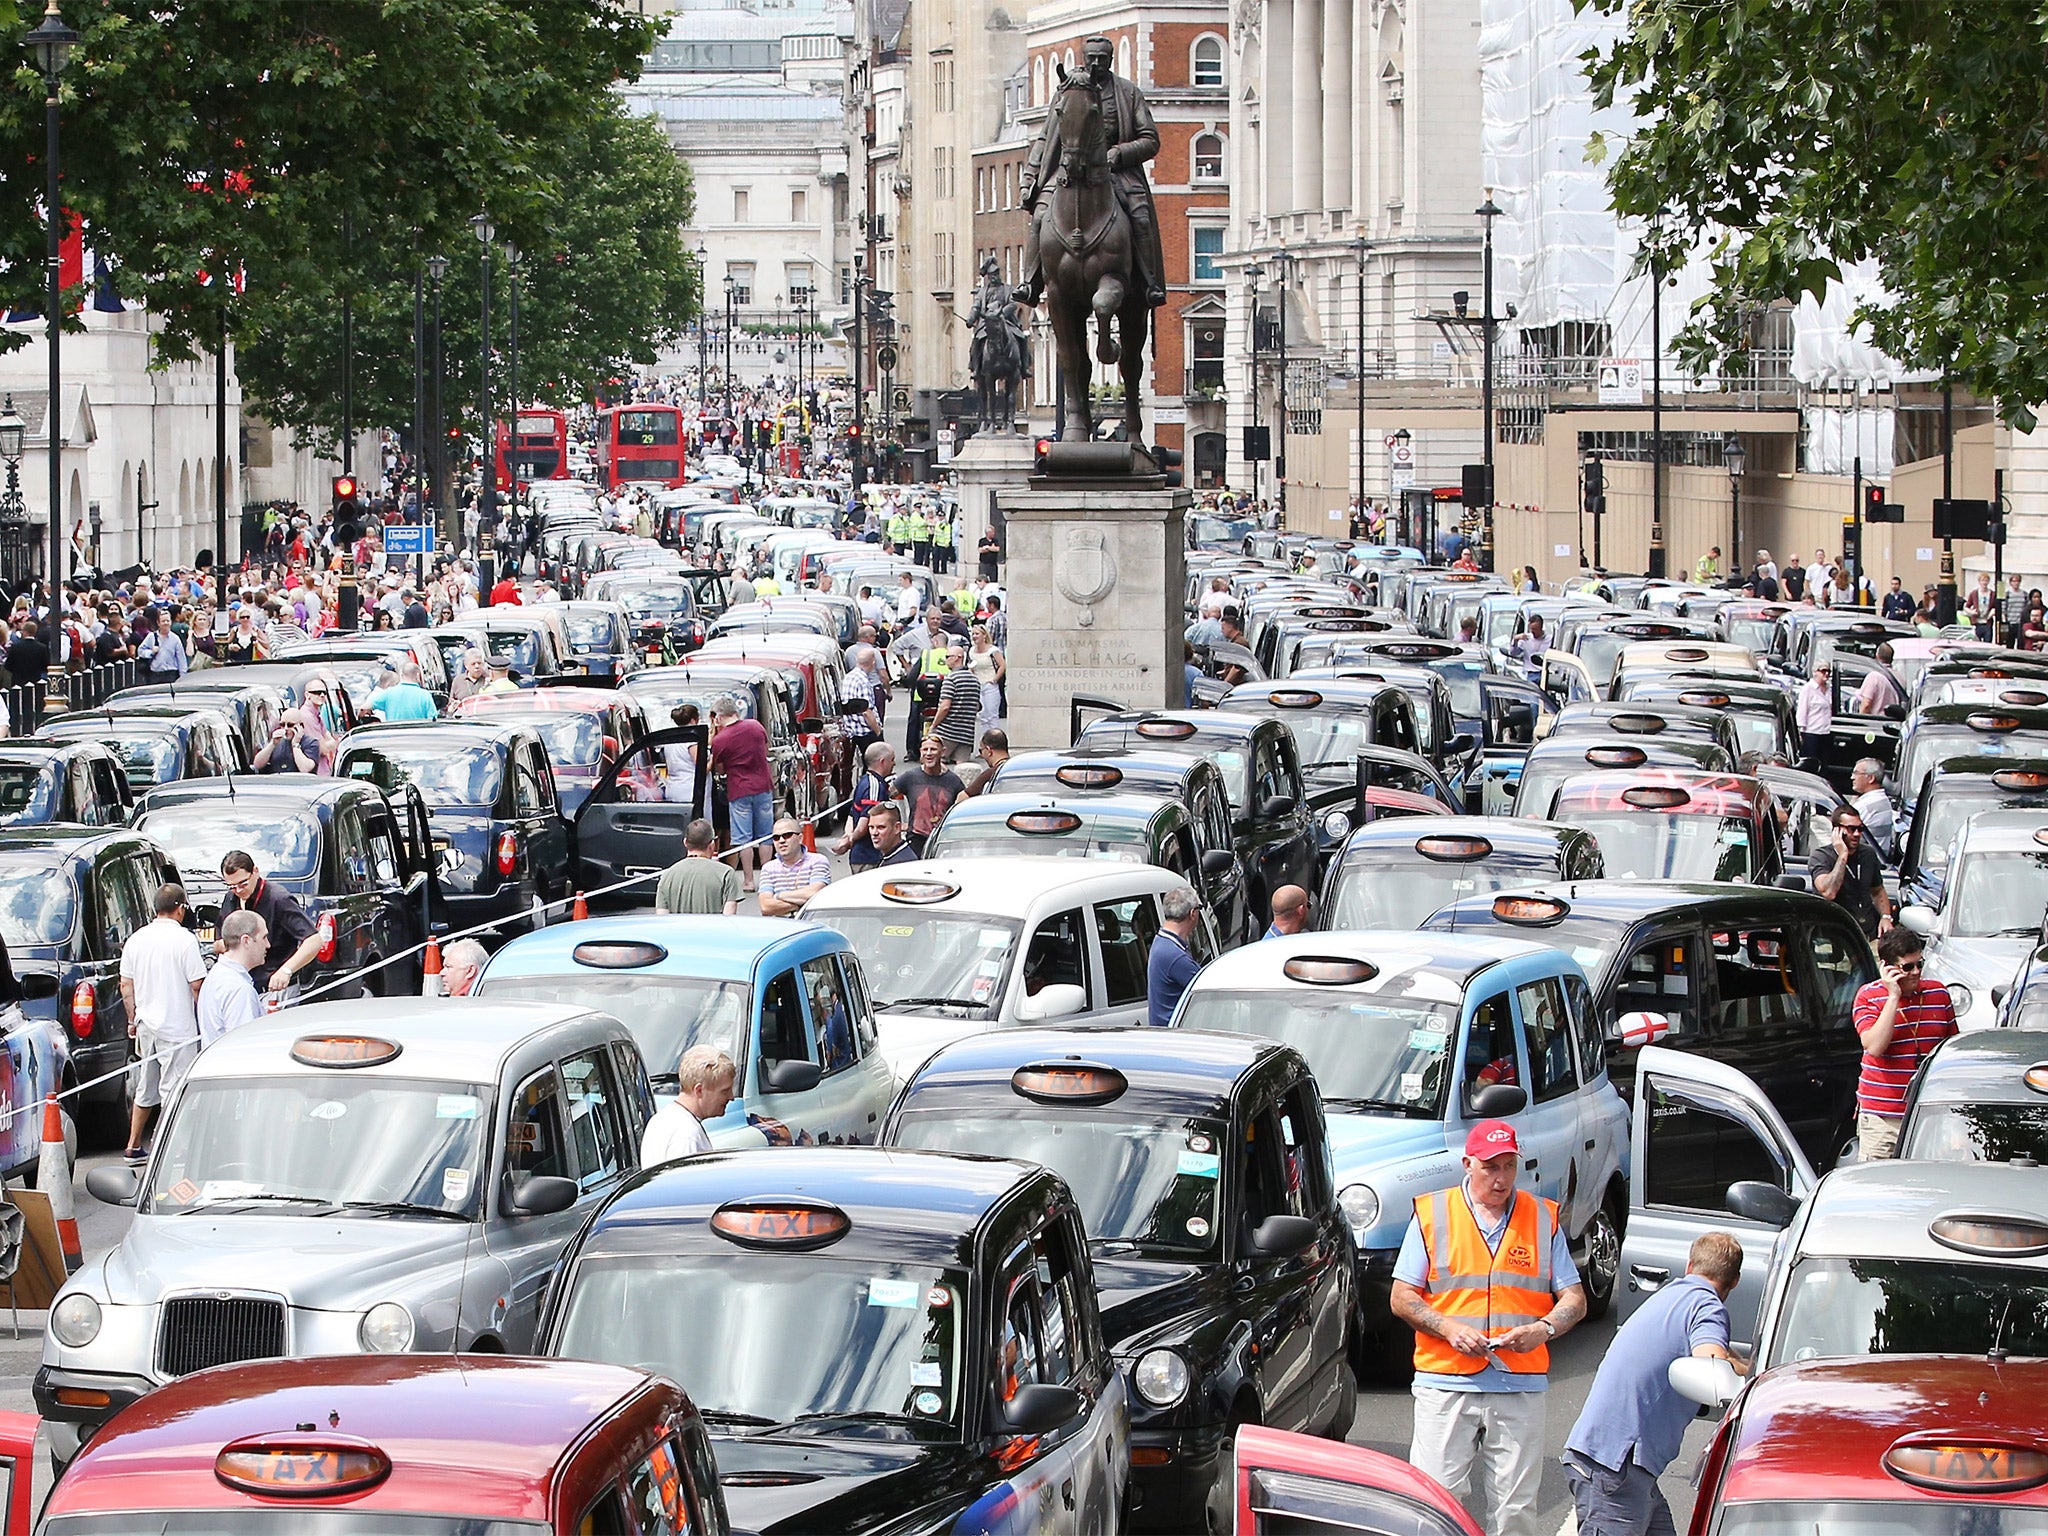 Black cab and licensed taxi drivers protest at Trafalgar Square, London over phone app Uber, in June